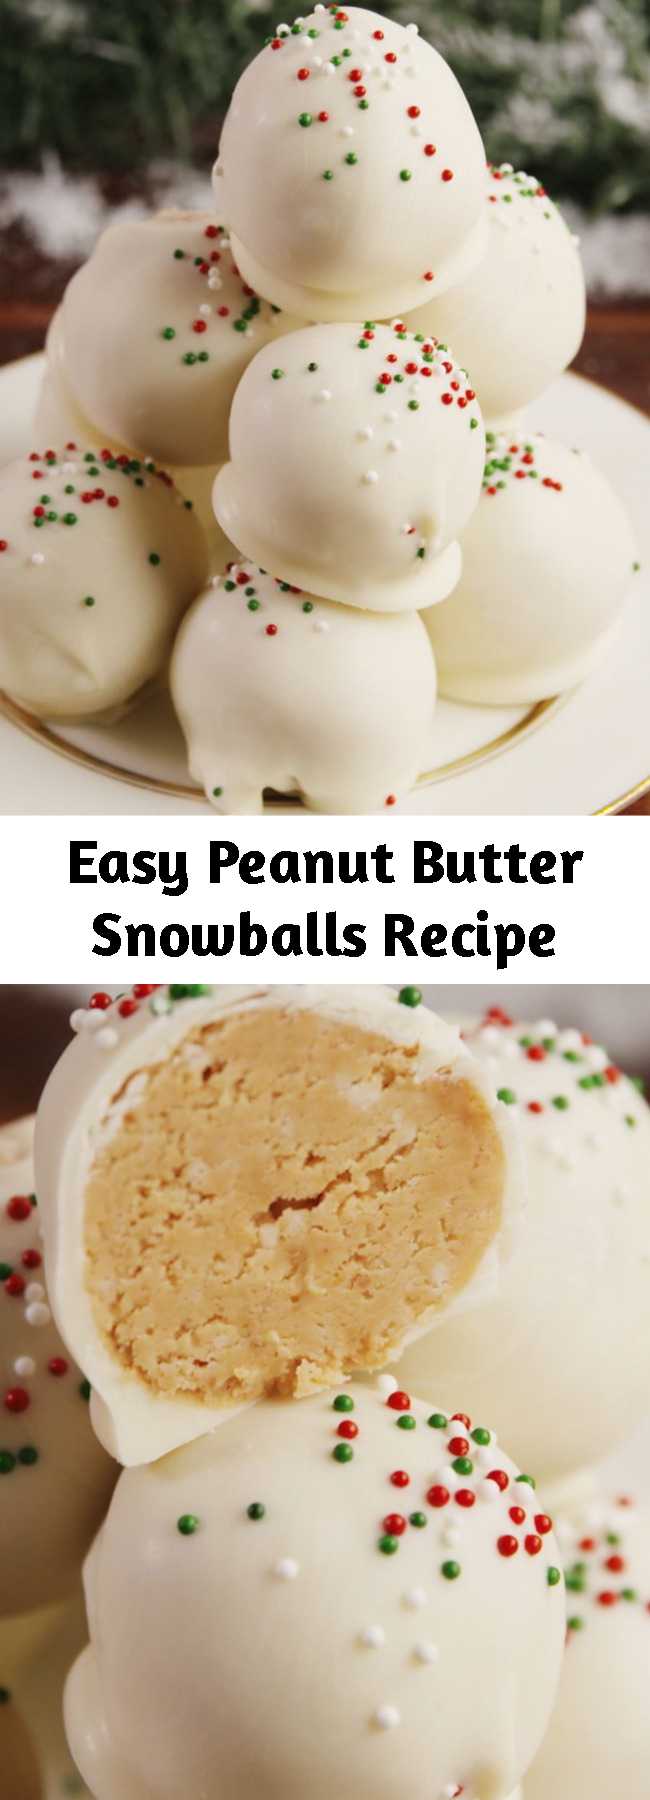 Easy Peanut Butter Snowballs Recipe - A snowball fight you actually want to be in. #food #holiday #christmas #easyrecipe #recipe #kids #inspiration #ideas